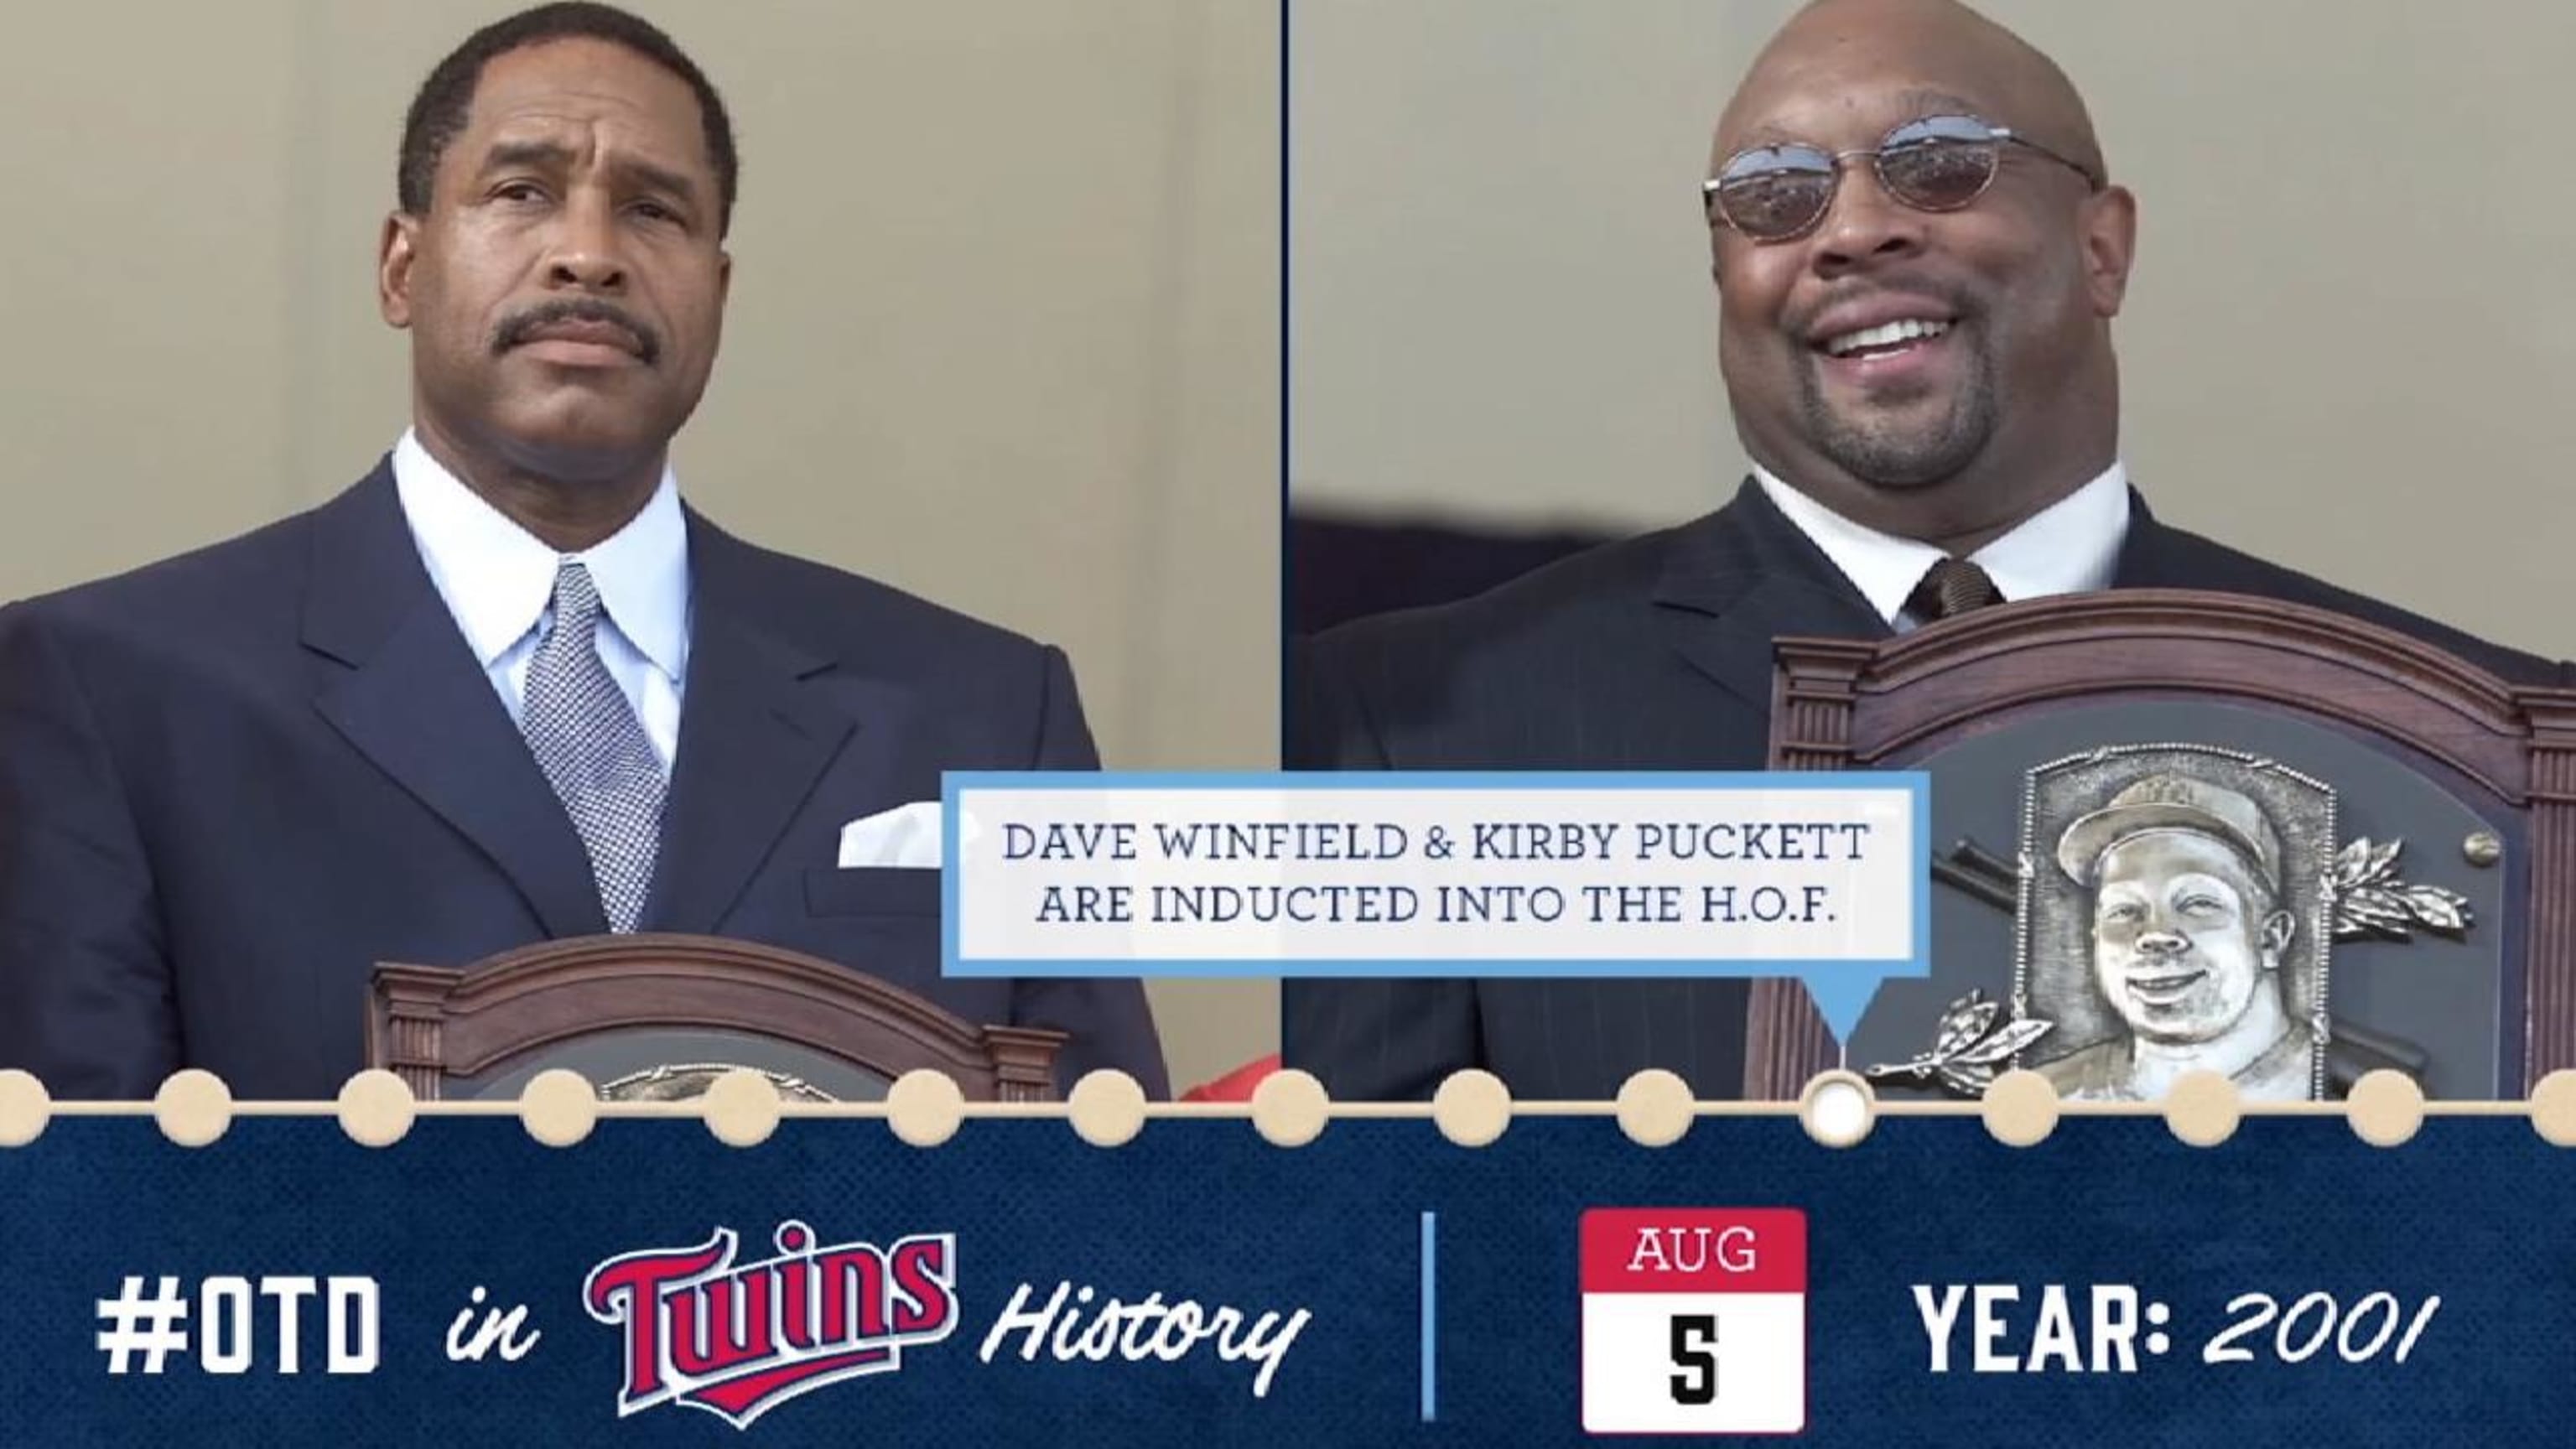 Making a Difference: MLB Hall of Famer Dave Winfield